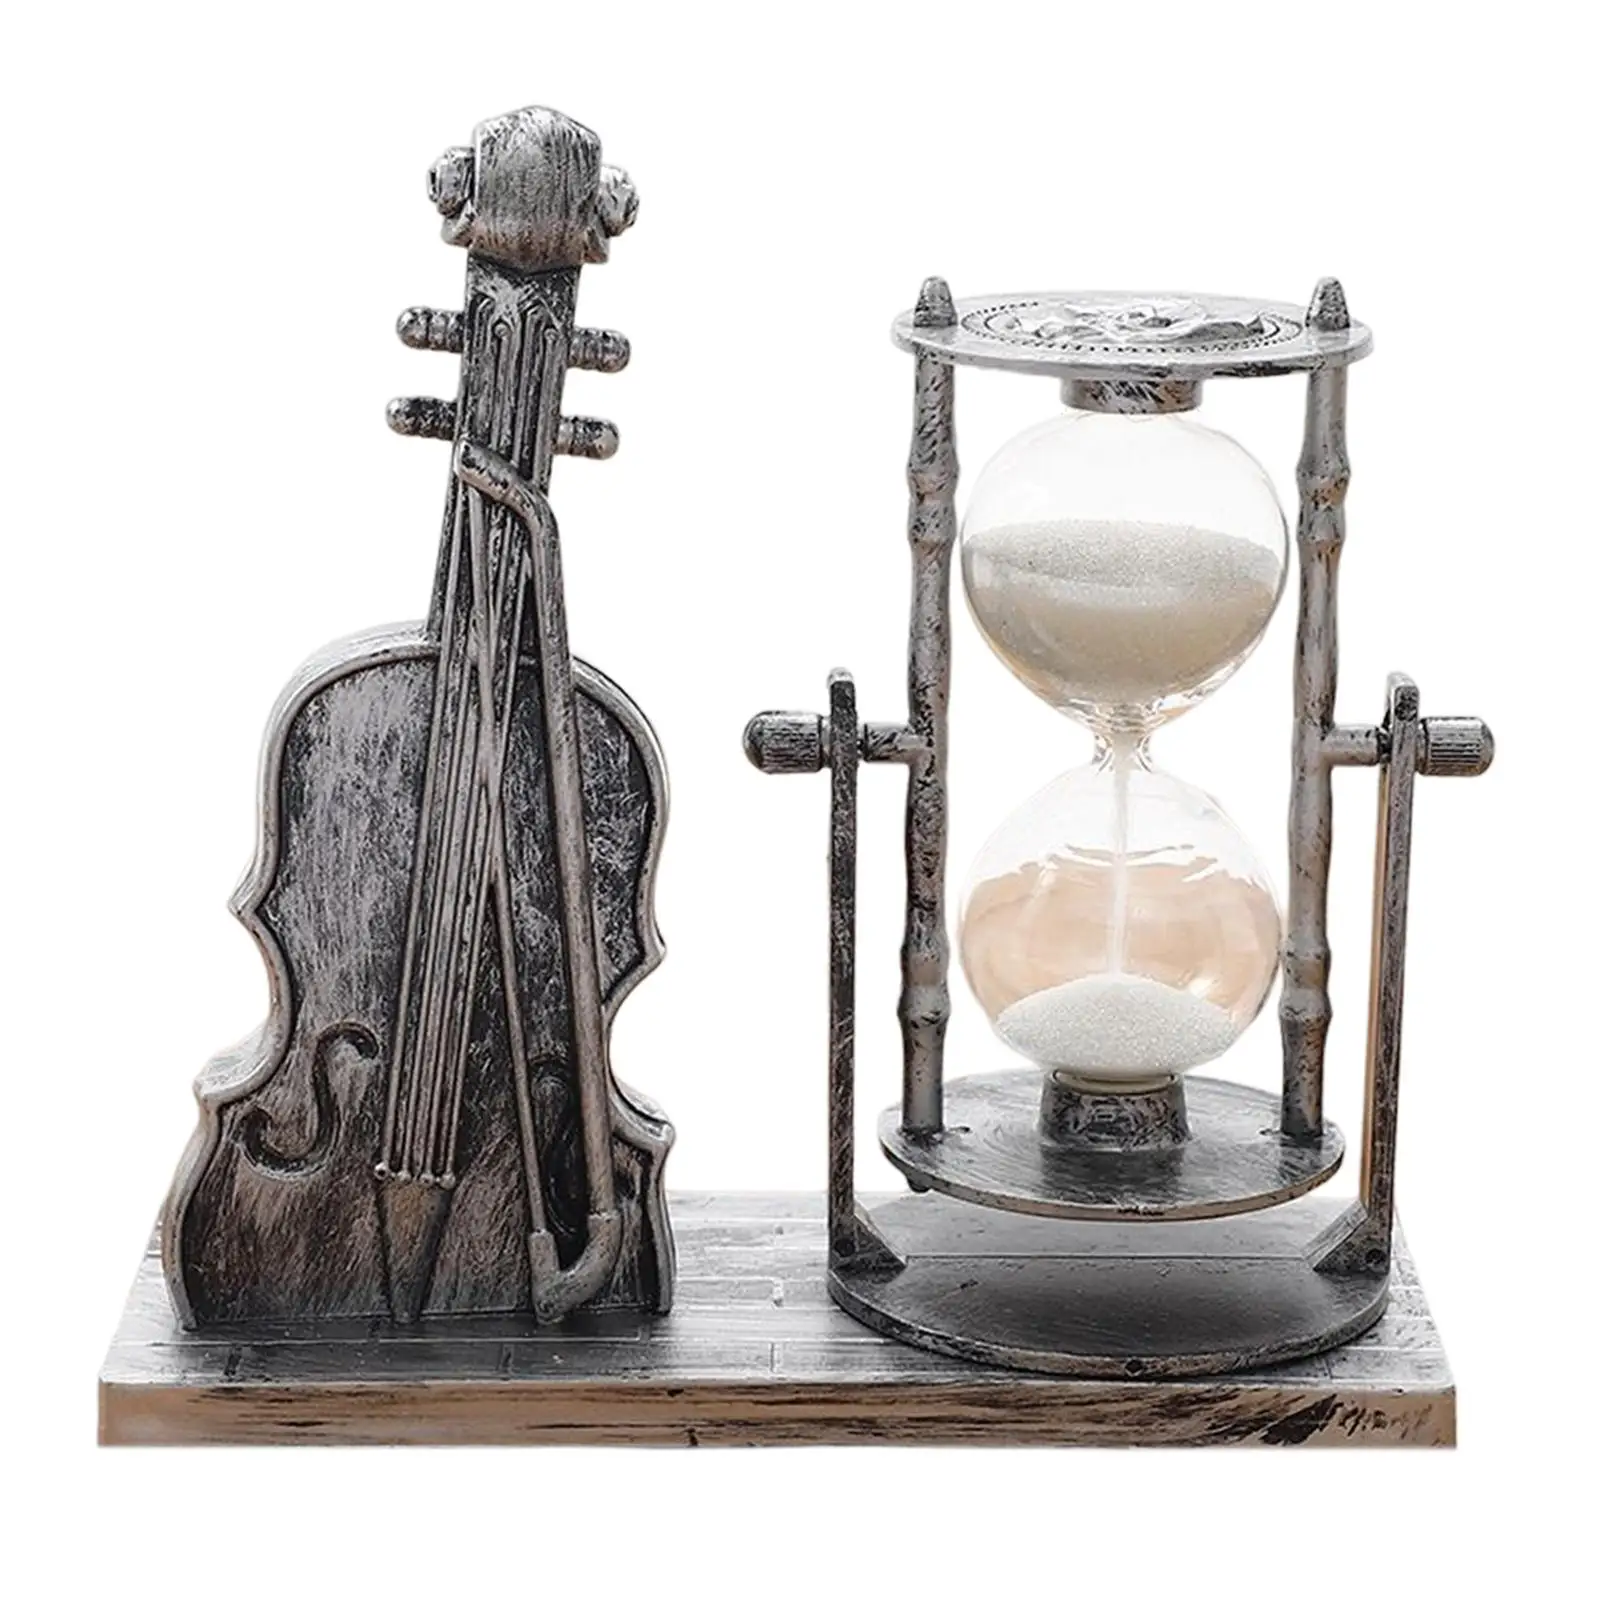 Hourglass Violin Sculpture Collection Sand Timer Exquisite Sandglass for Anniversary Yard Festival Table Centerpieces Wedding